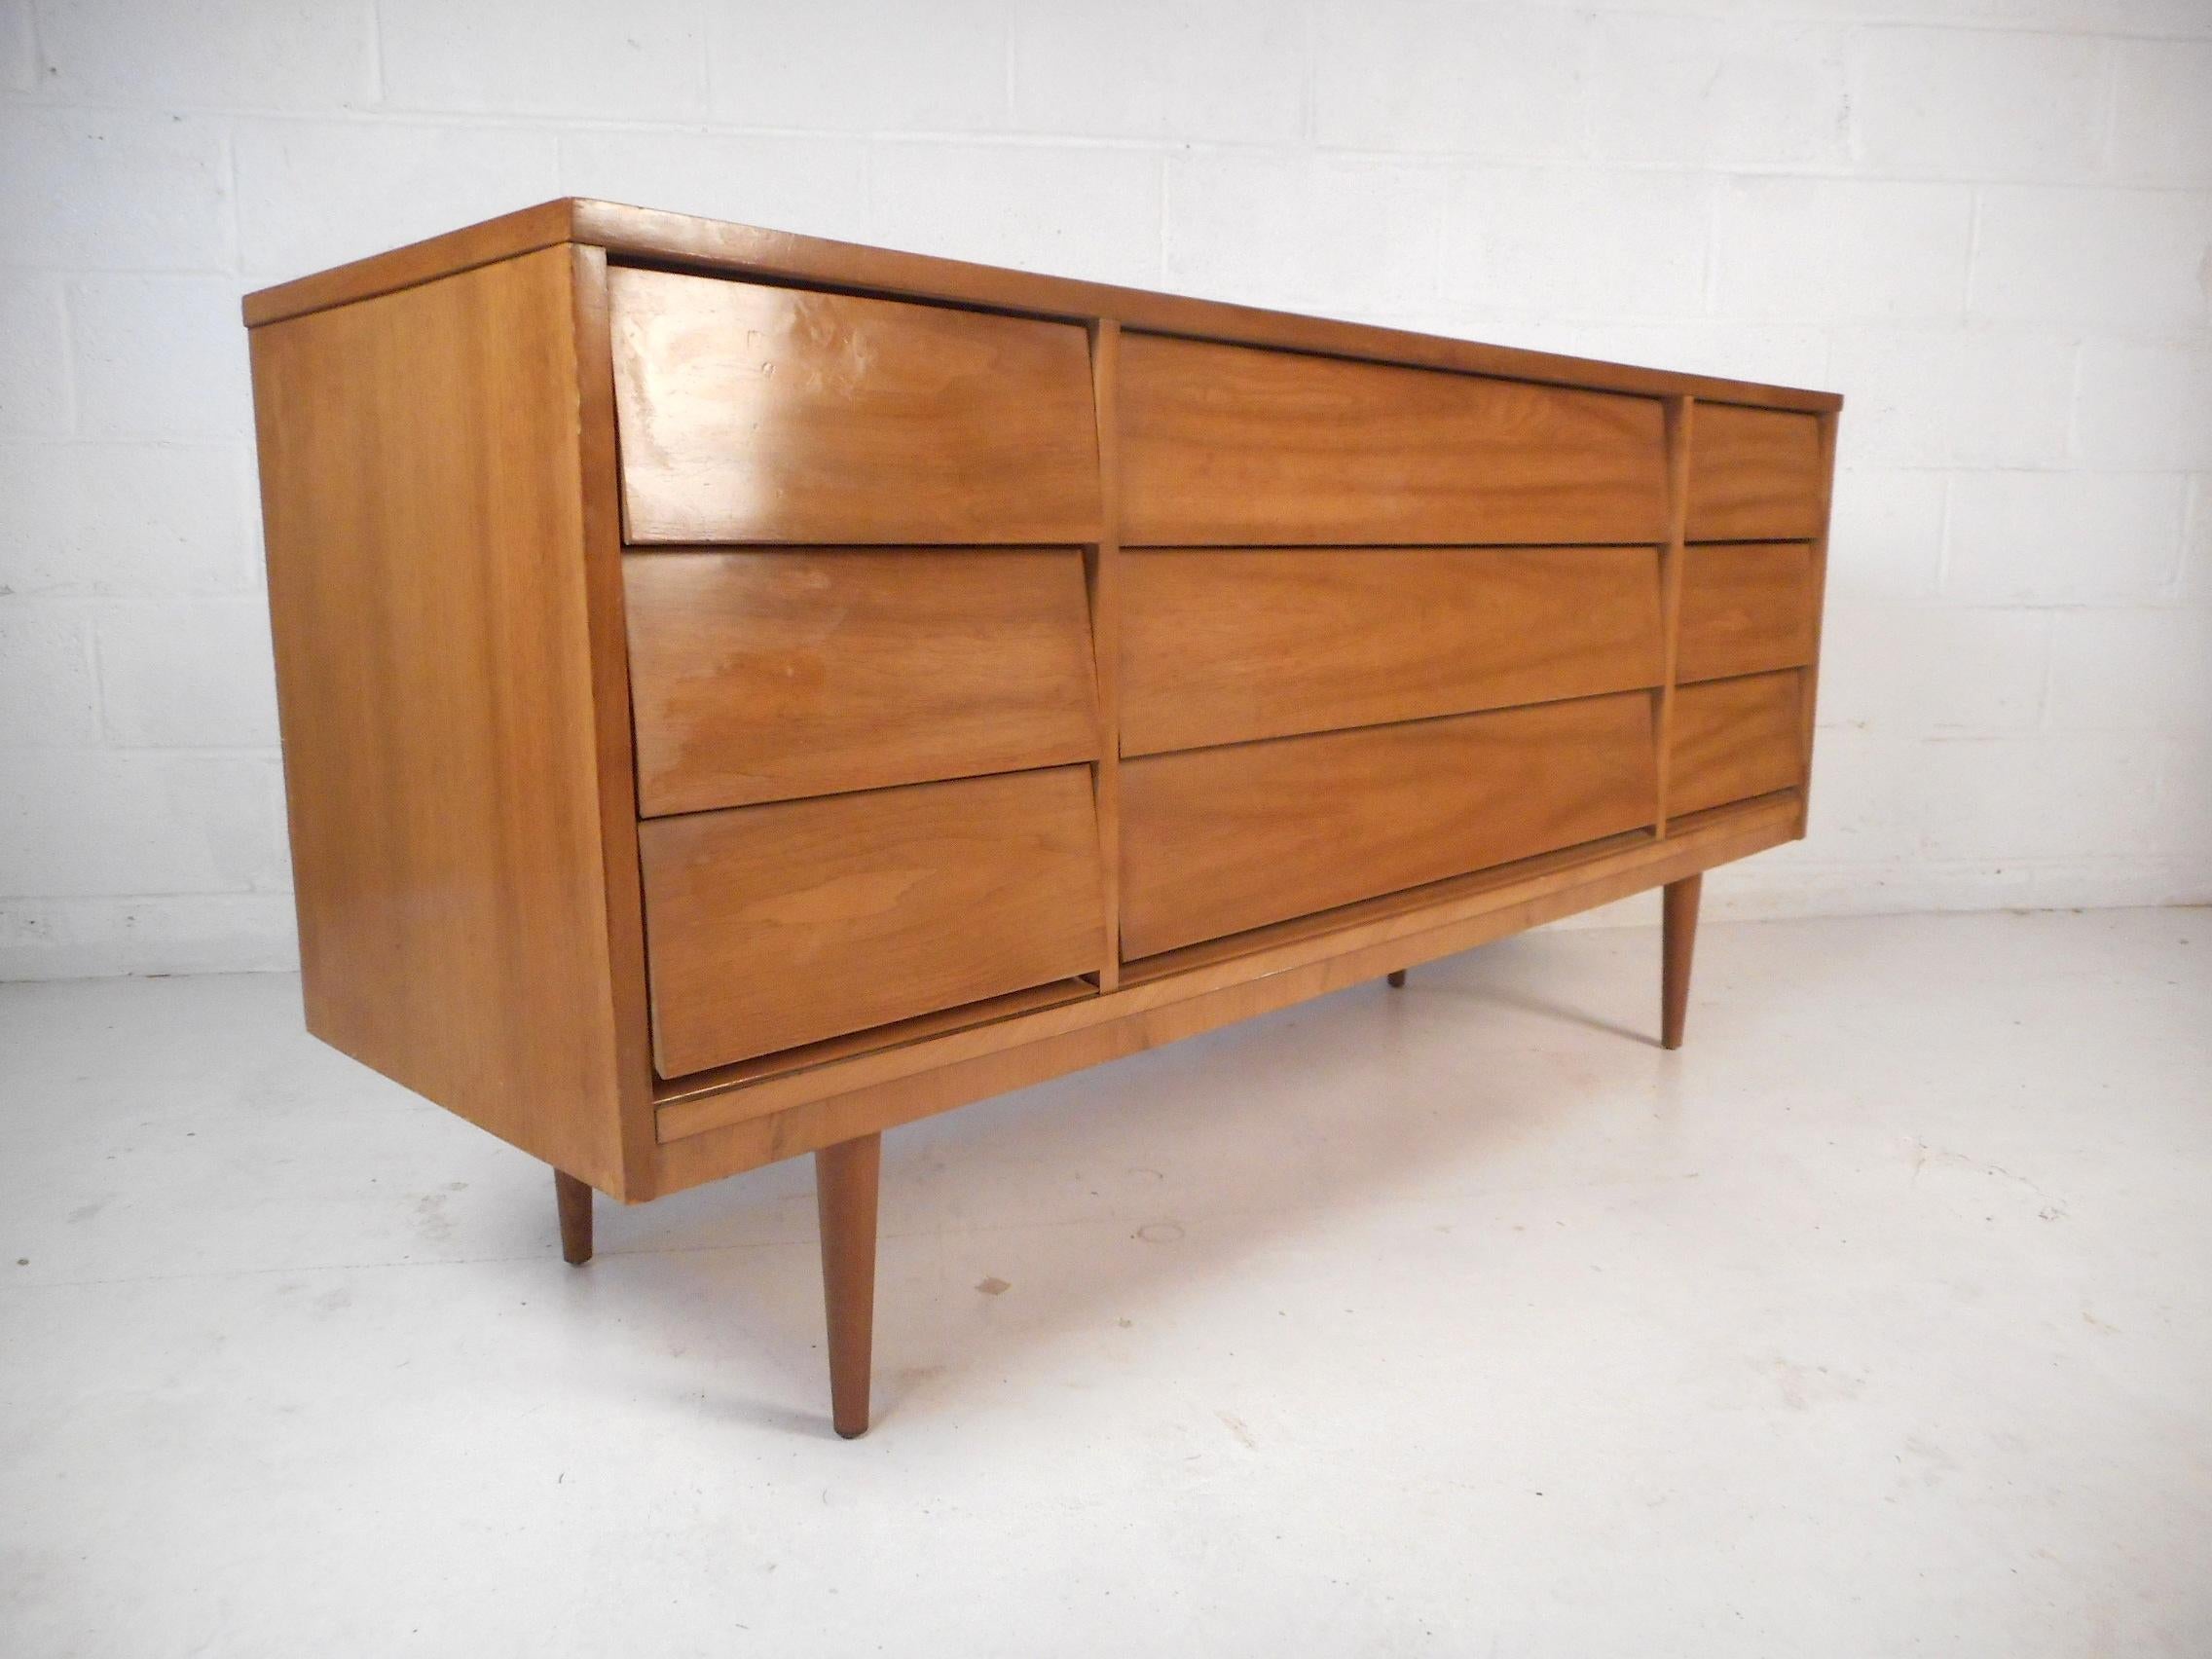 This stylish set of Mid-Century bedroom furniture features a nine-drawer dresser and two nightstands with matching walnut wood grain throughout. Sleek angular drawer faces with dovetail construction ensure ample storage space. Sturdy construction